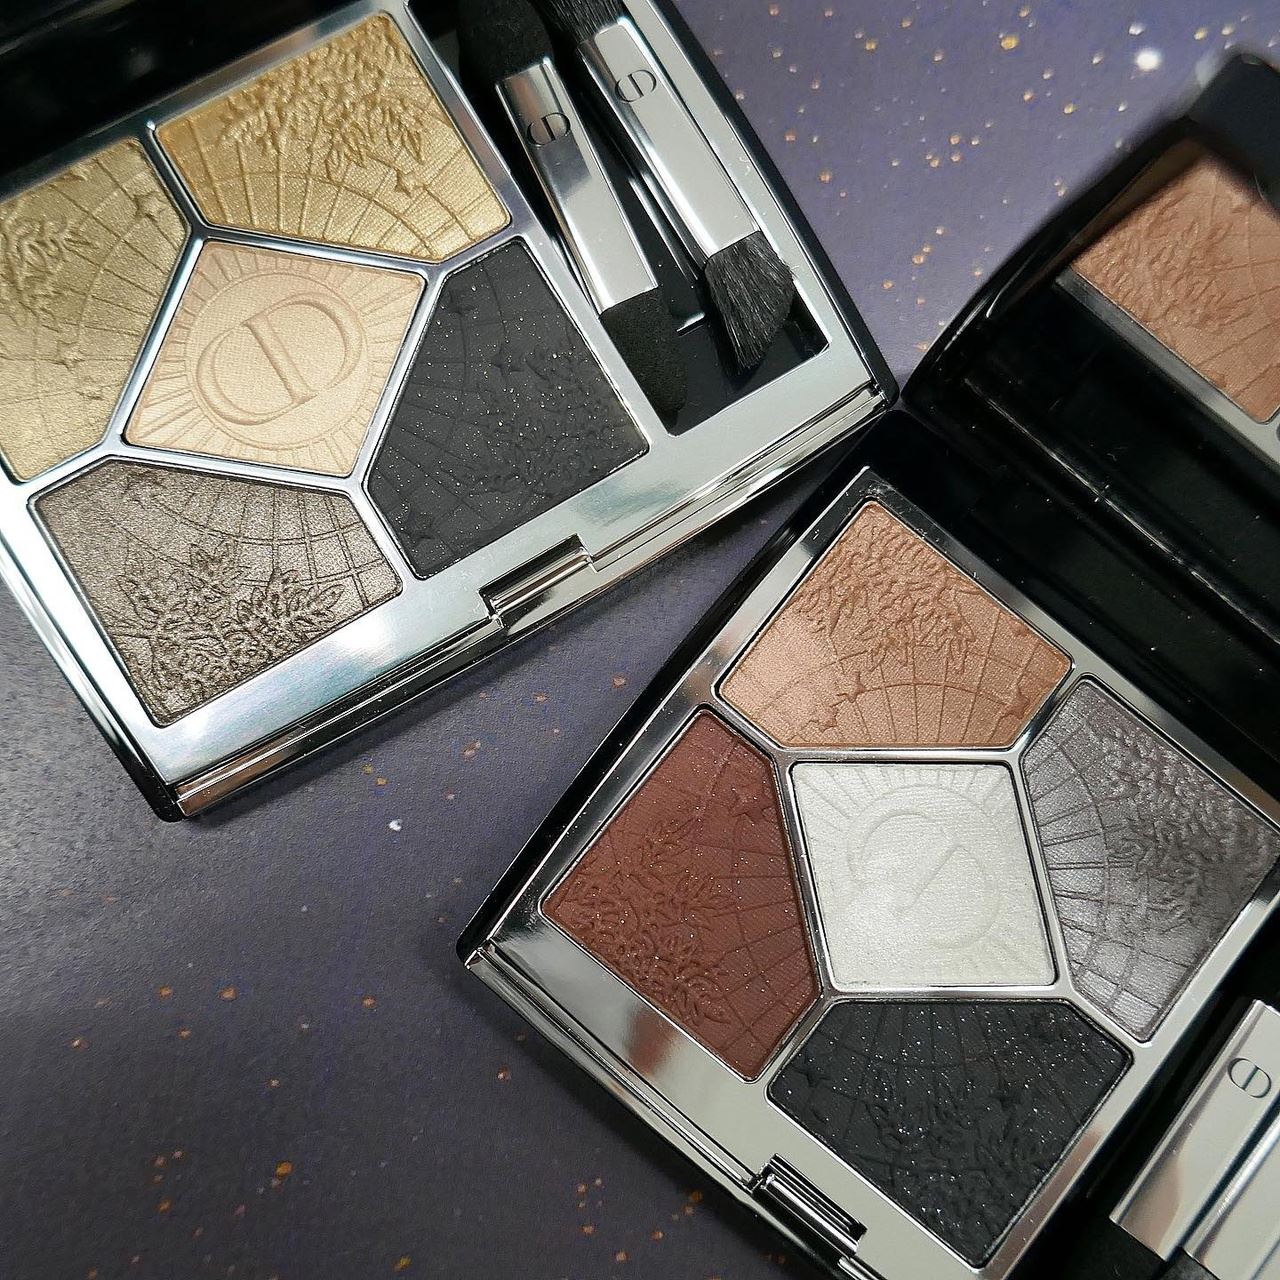 Dior Atelier of Dreams Makeup Collection Christmas Holiday 2022 - Swatches